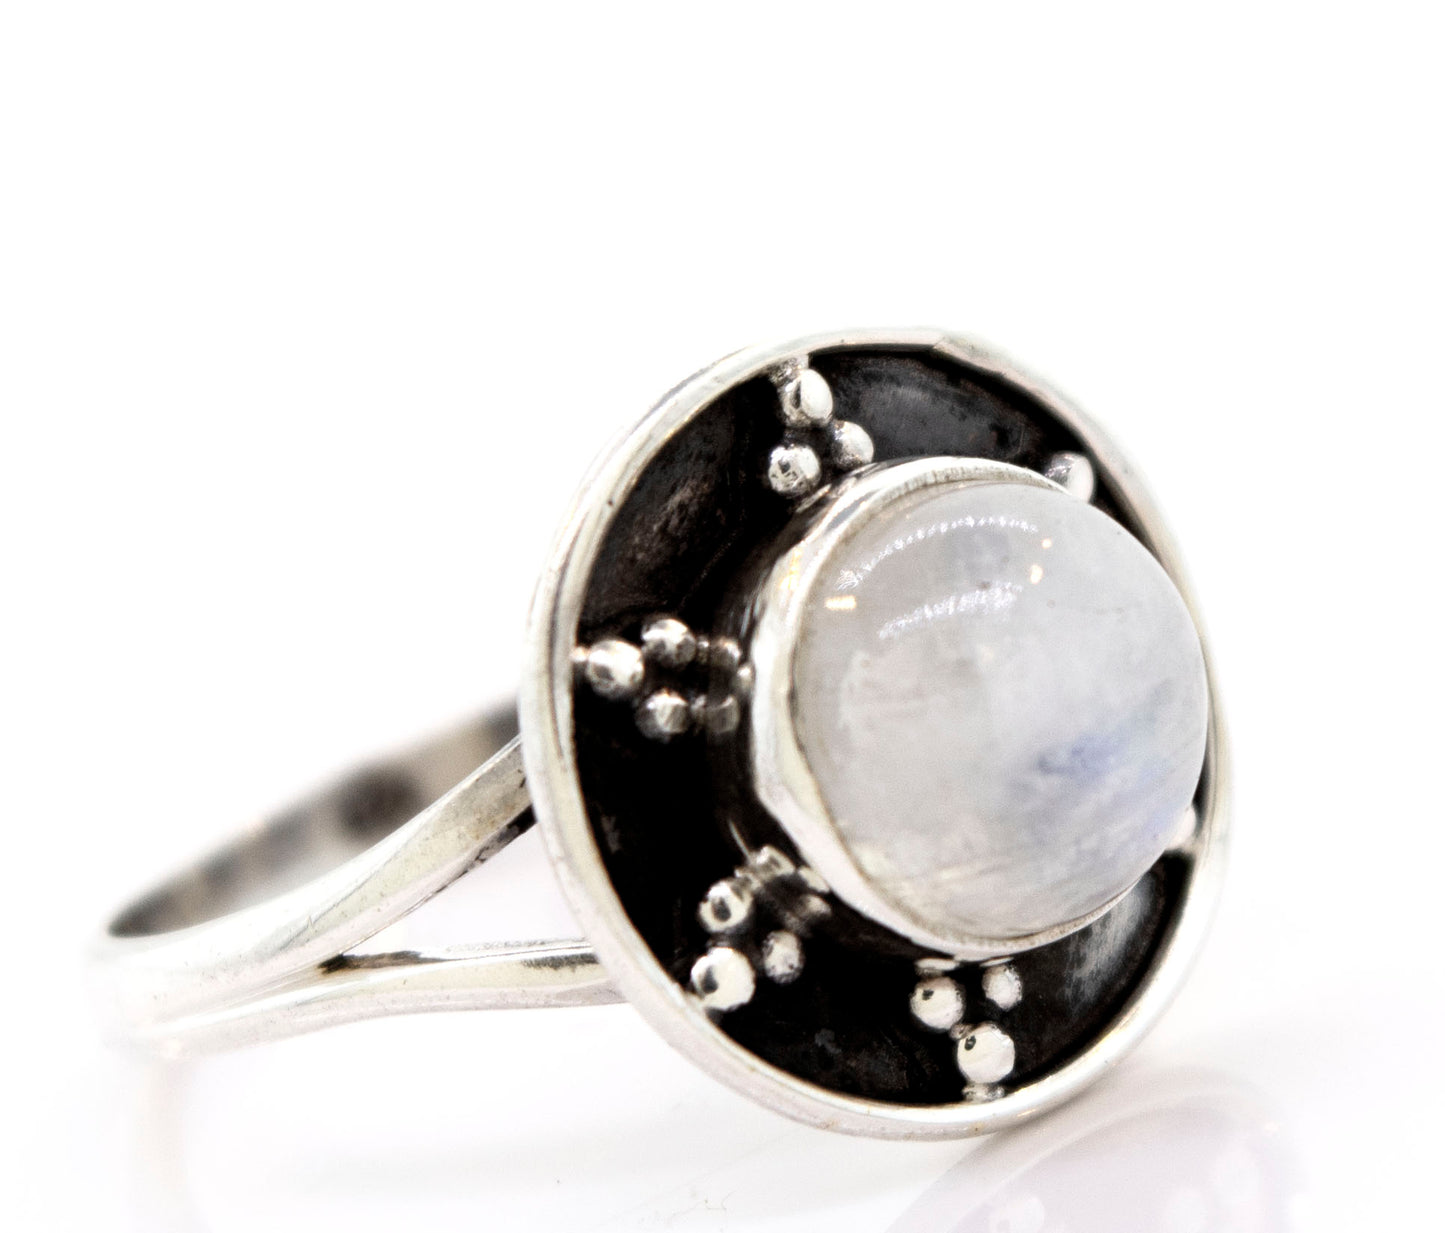 
                  
                    A Gemstone Ring With Unique Oxidized Design featuring a round white gemstone set in an oxidized silver circular setting with small sterling silver bead accents, epitomizing elegant gemstone jewelry.
                  
                